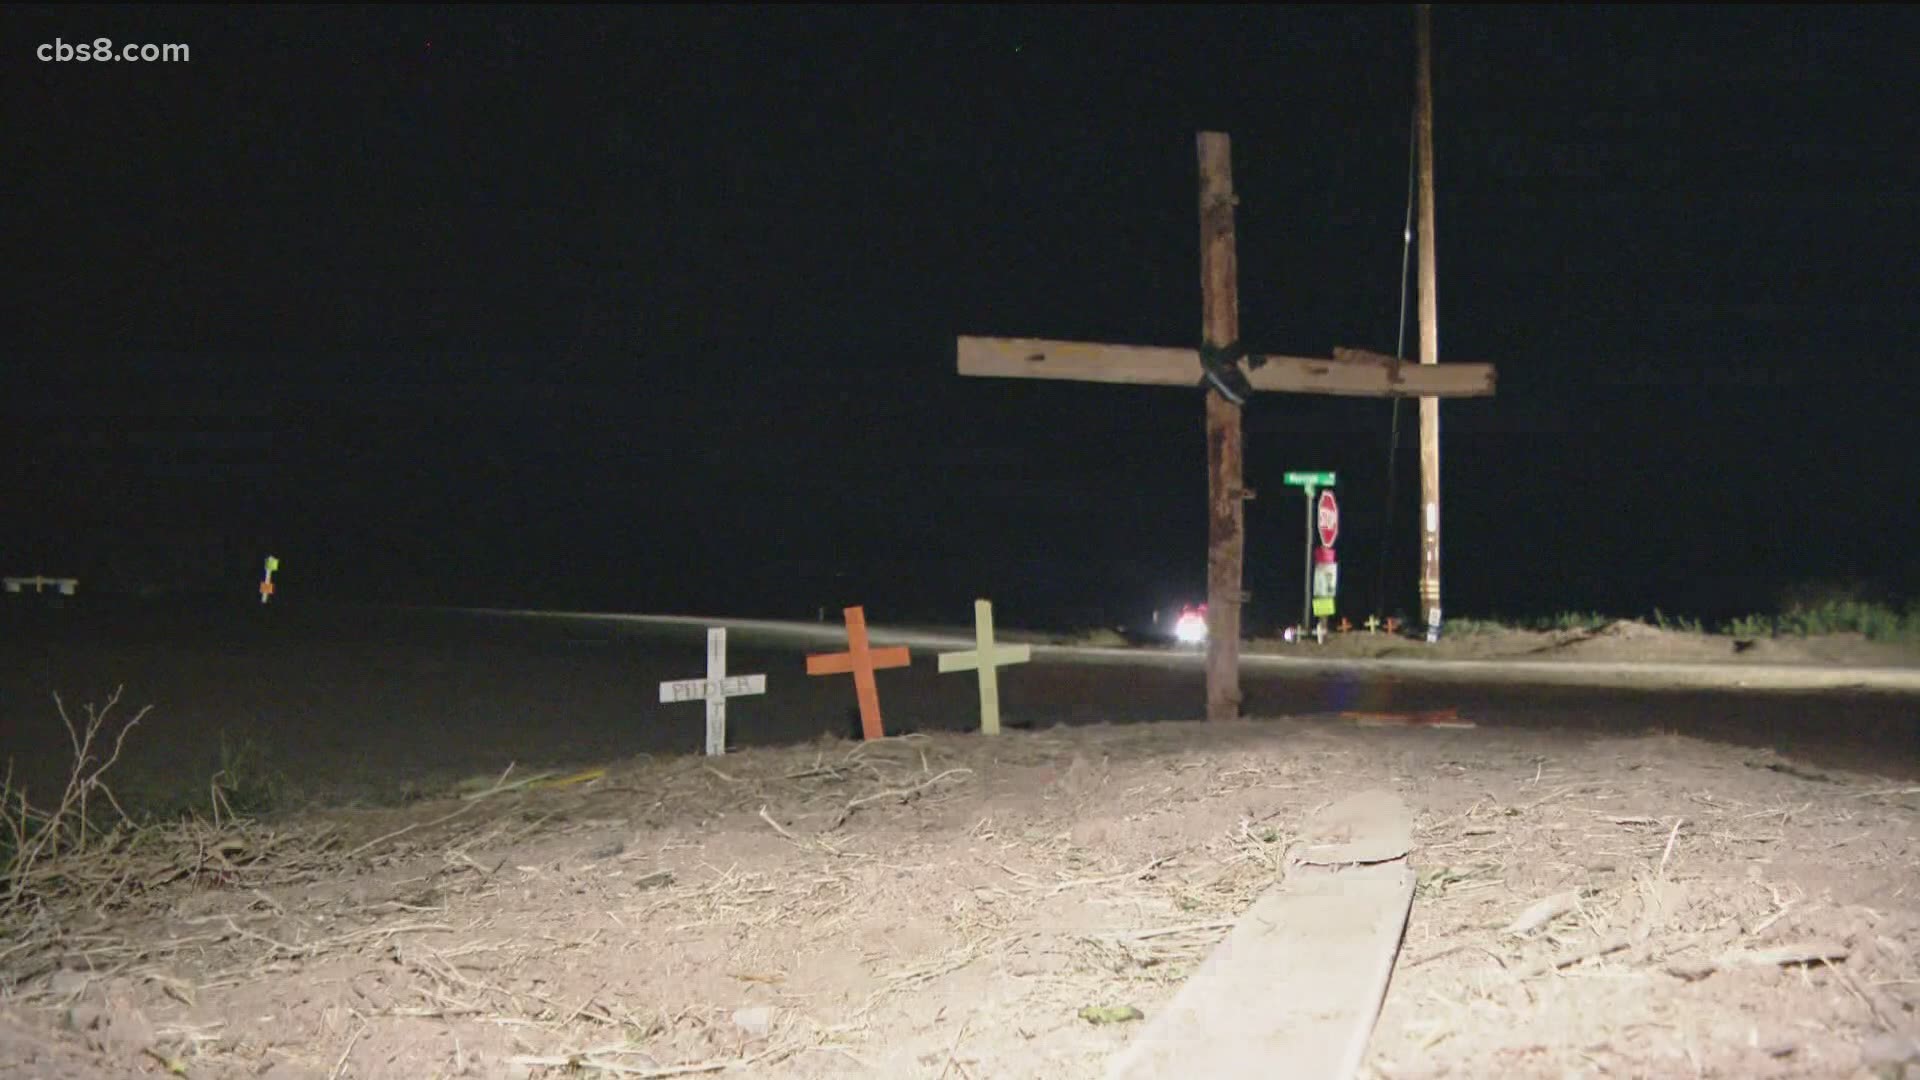 Someone created a memorial using wooden crosses at the intersection where the accident happened.